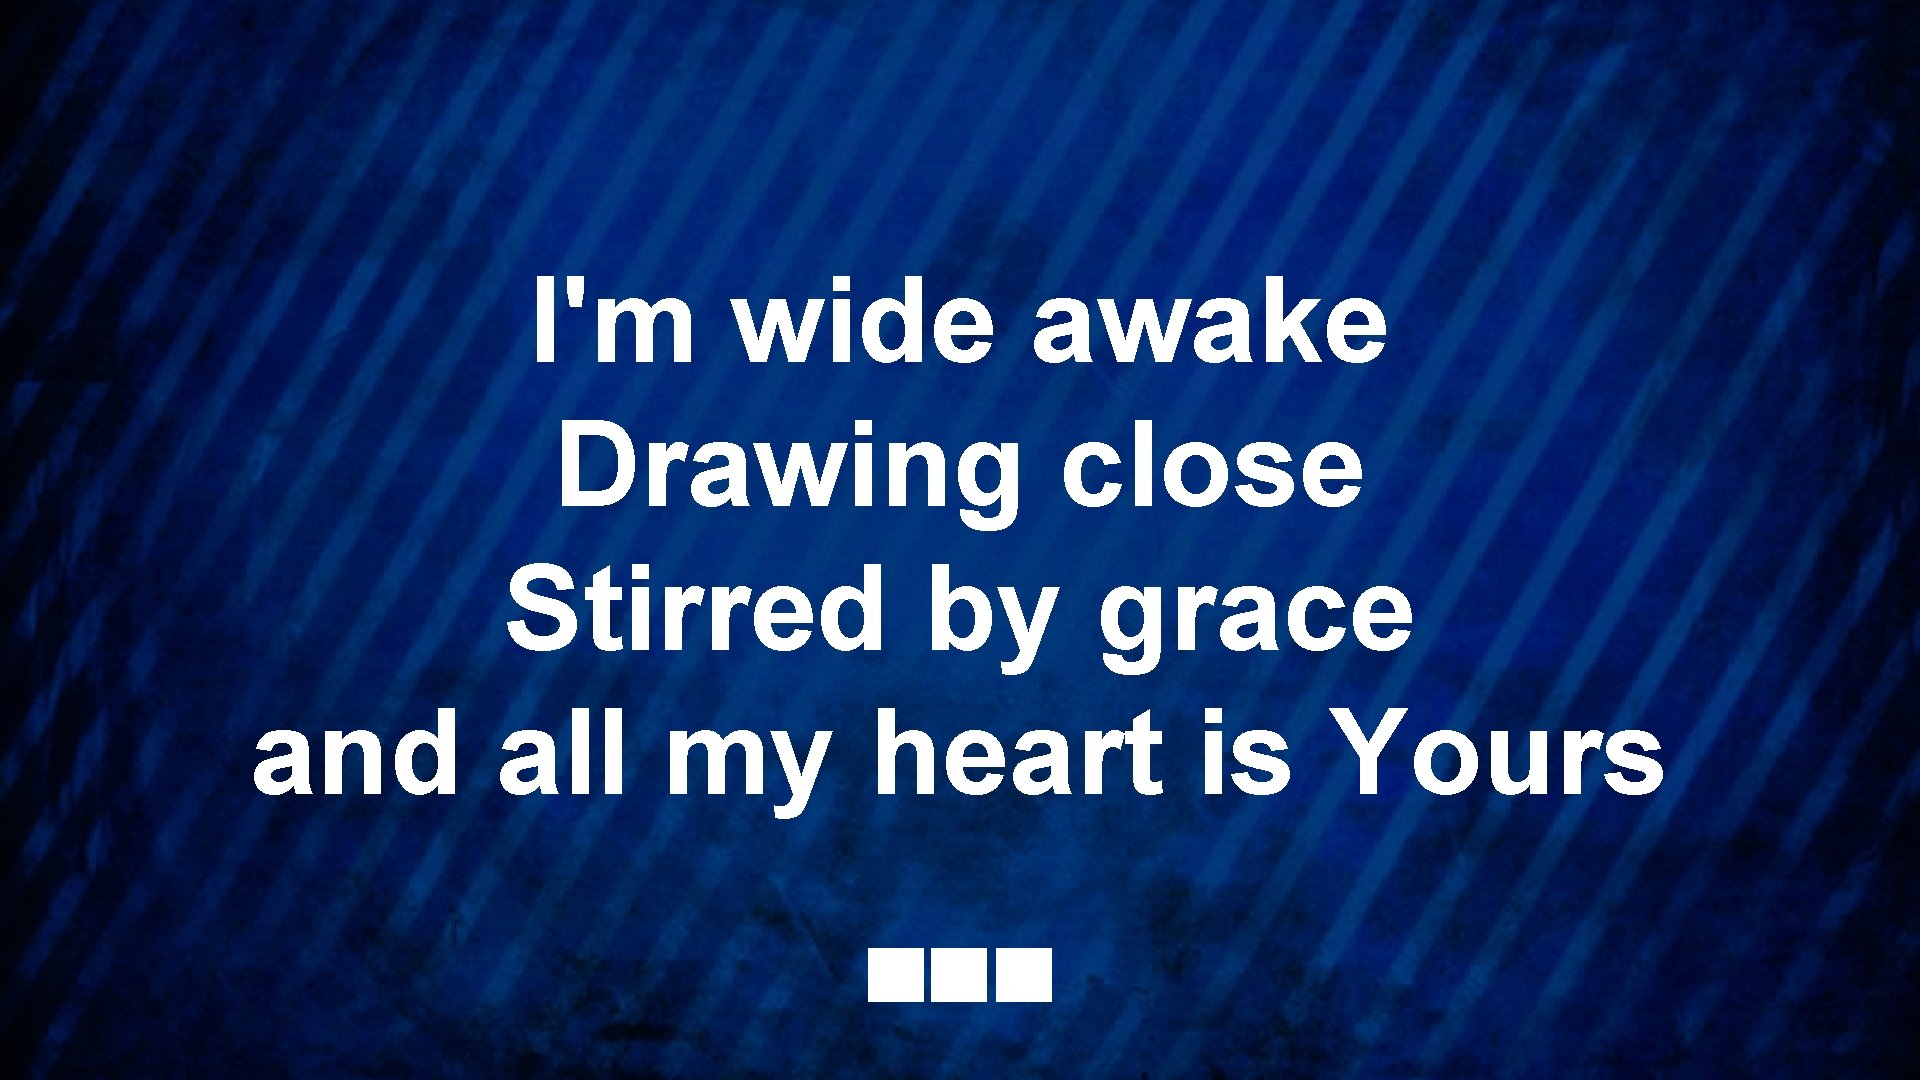 I'm wide awake Drawing close Stirred by grace and all my heart is Yours